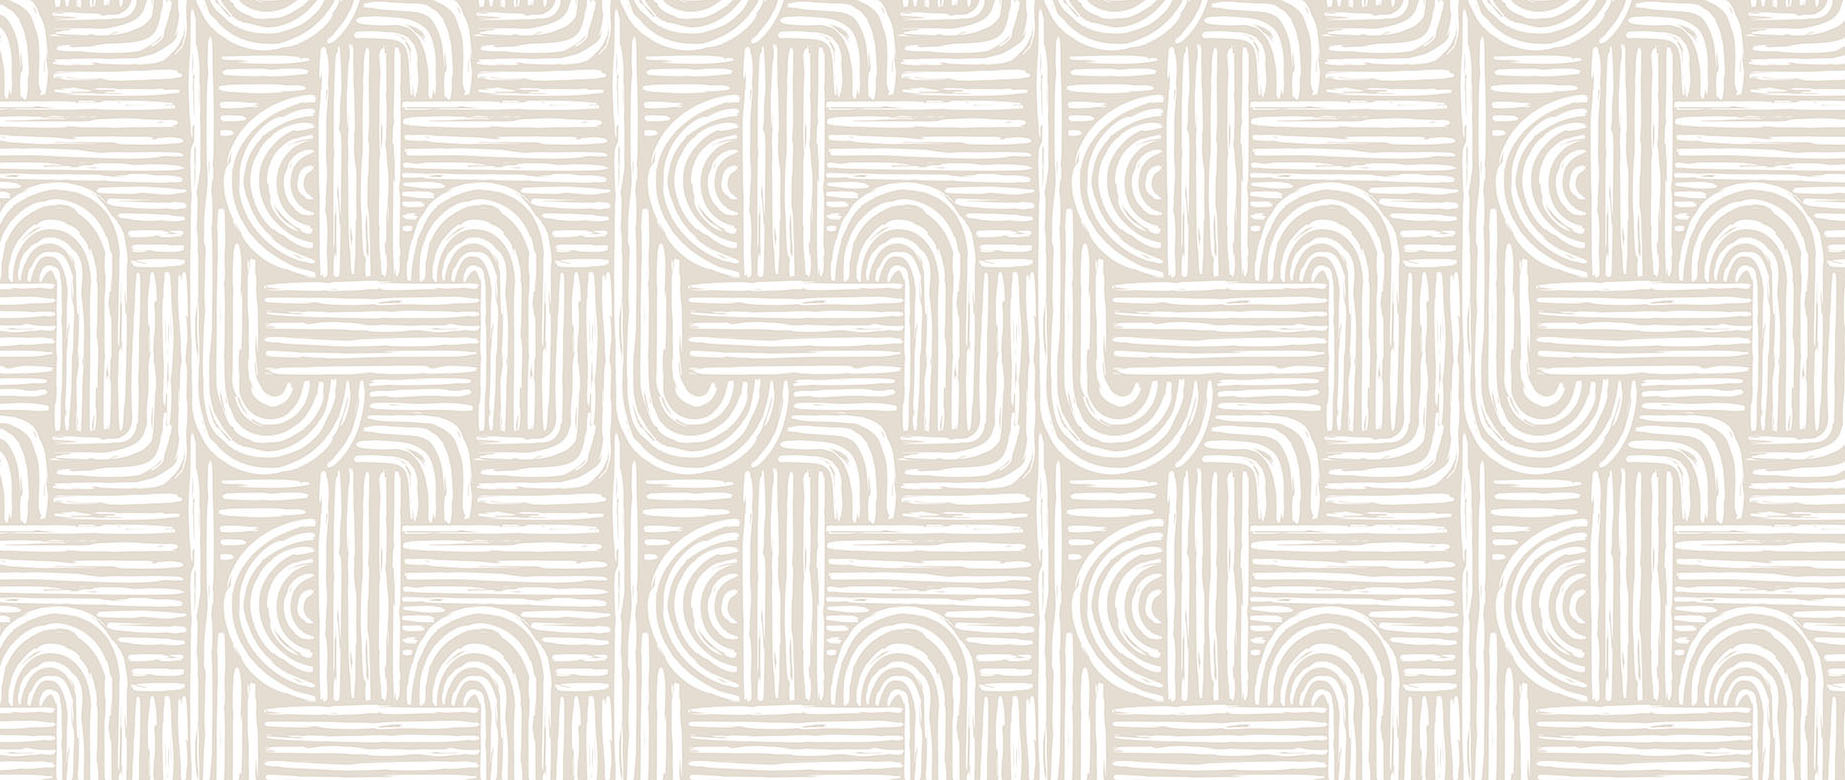 hand-drawn-lines-interwoven-wallpaper-seamless-repeat-view